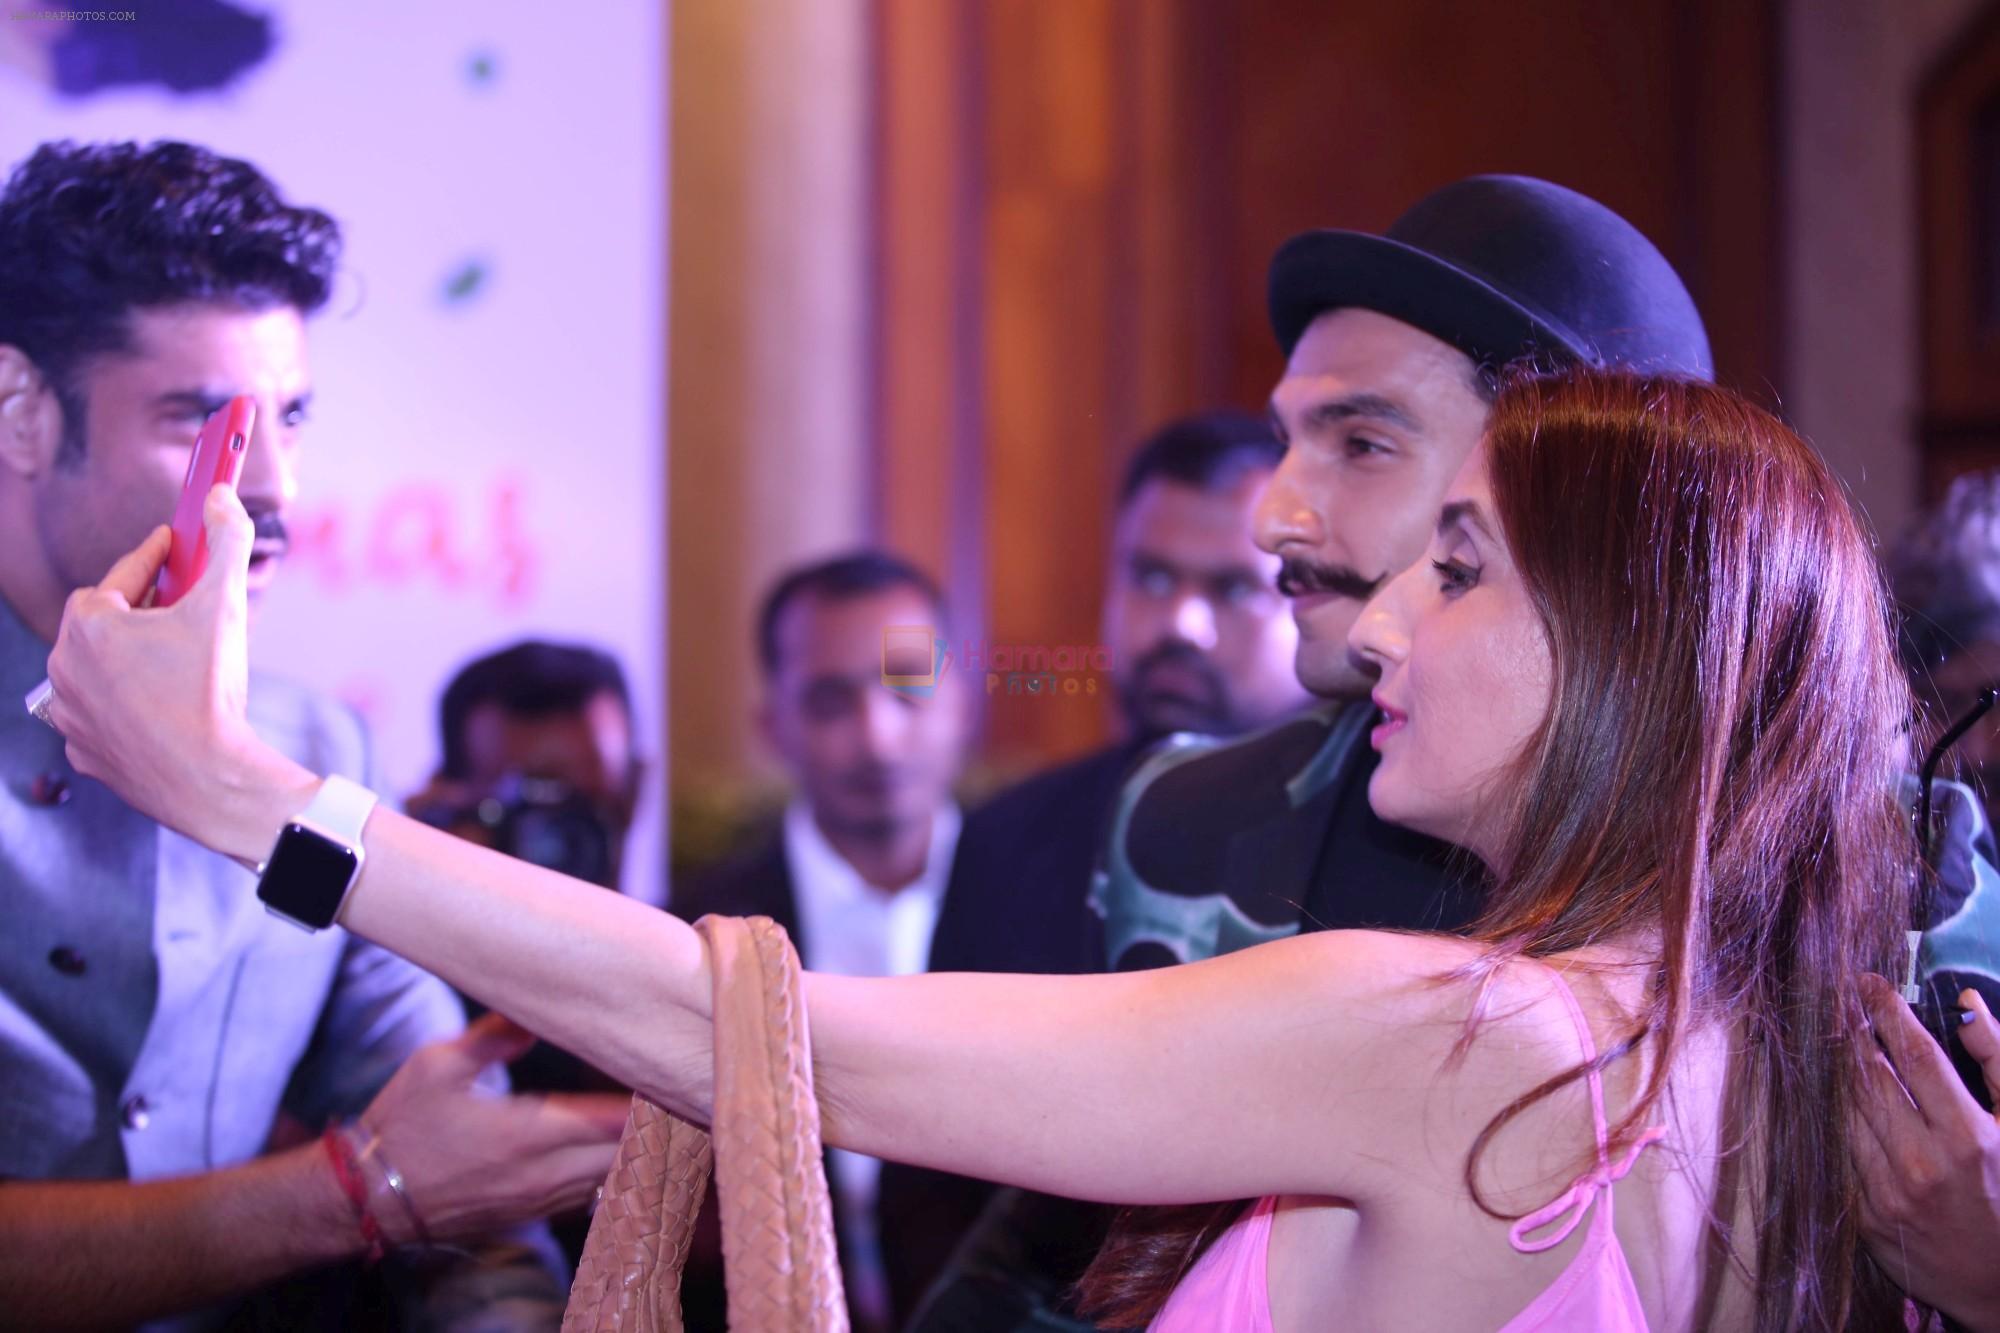 Ranveer Singh at the Launch Of Twinkle Khanna's Book Pyjamas Are Forgiving in Taj Lands End Bandra on 7th Sept 2018